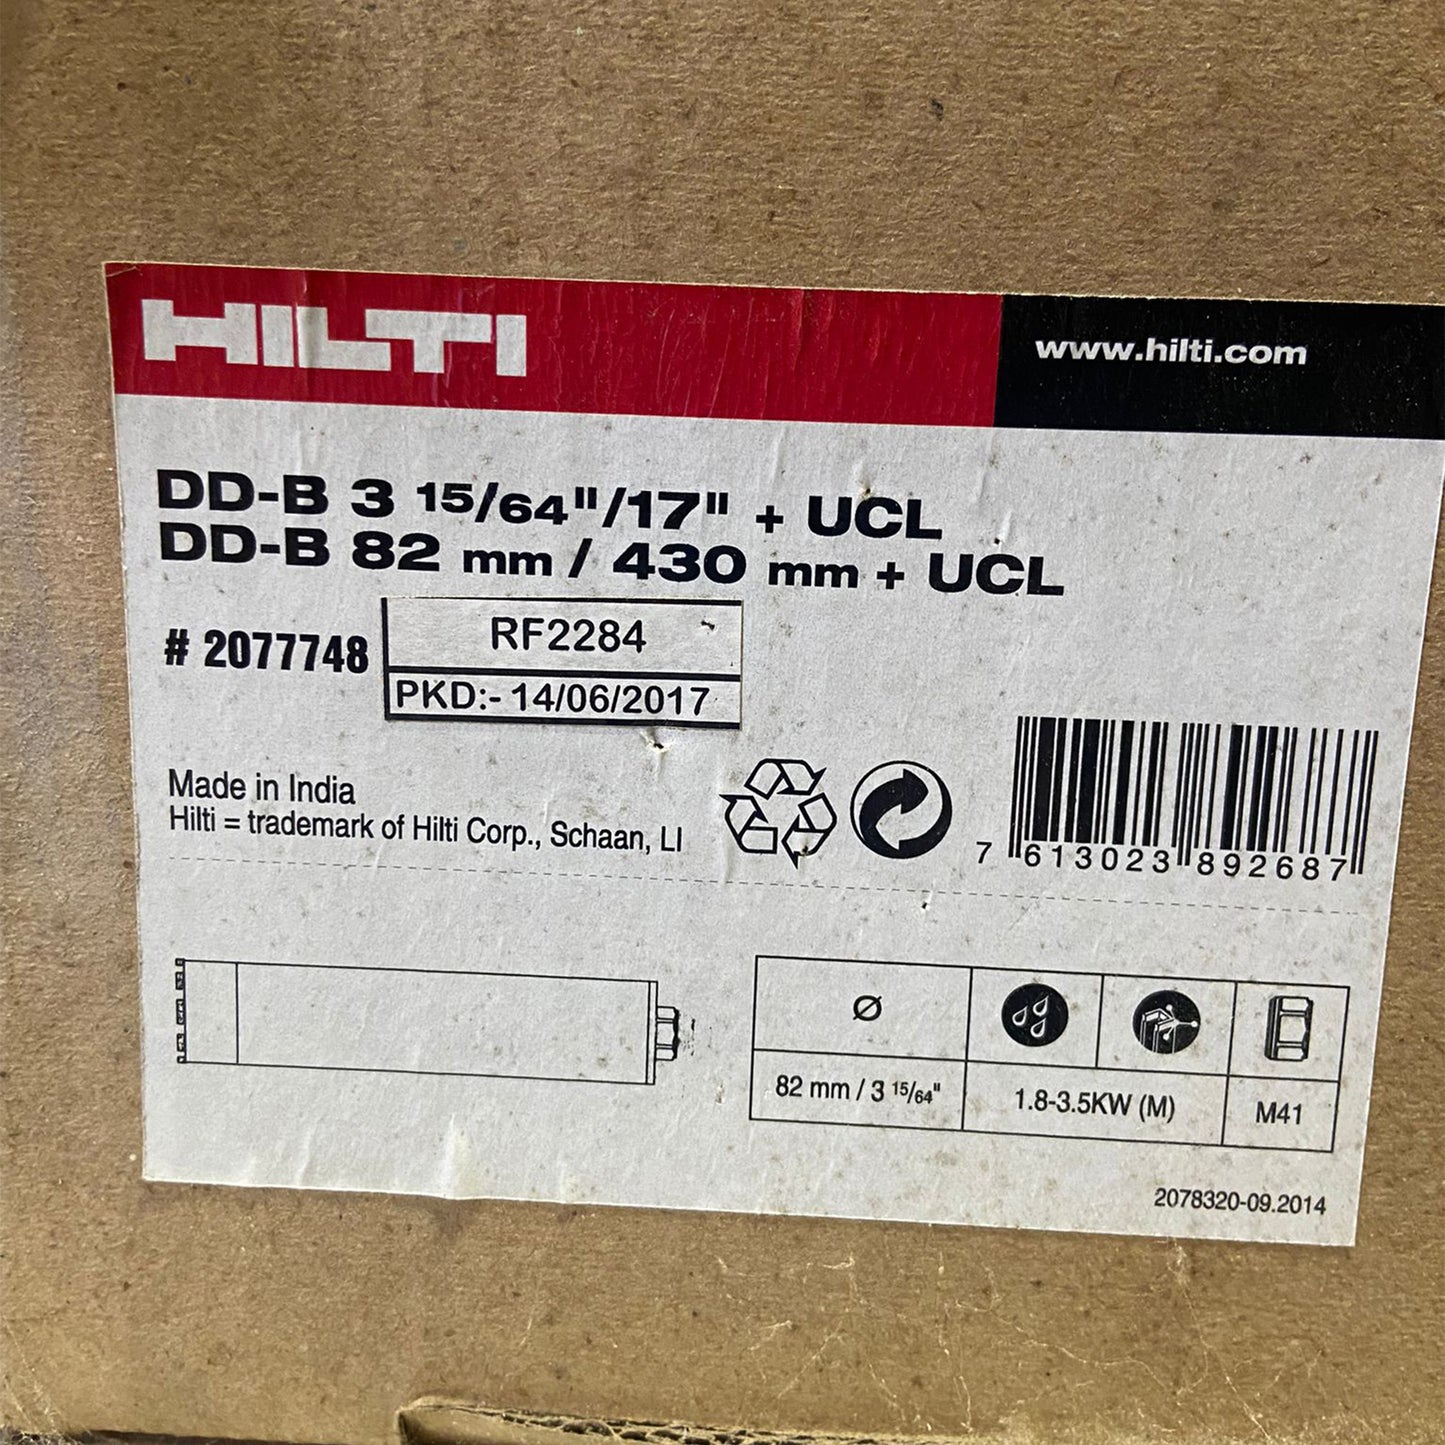 DD-B 3 15/64" to 17" Diamond Drill Bit Set with UCL - 82mm to 430mm - 2077748